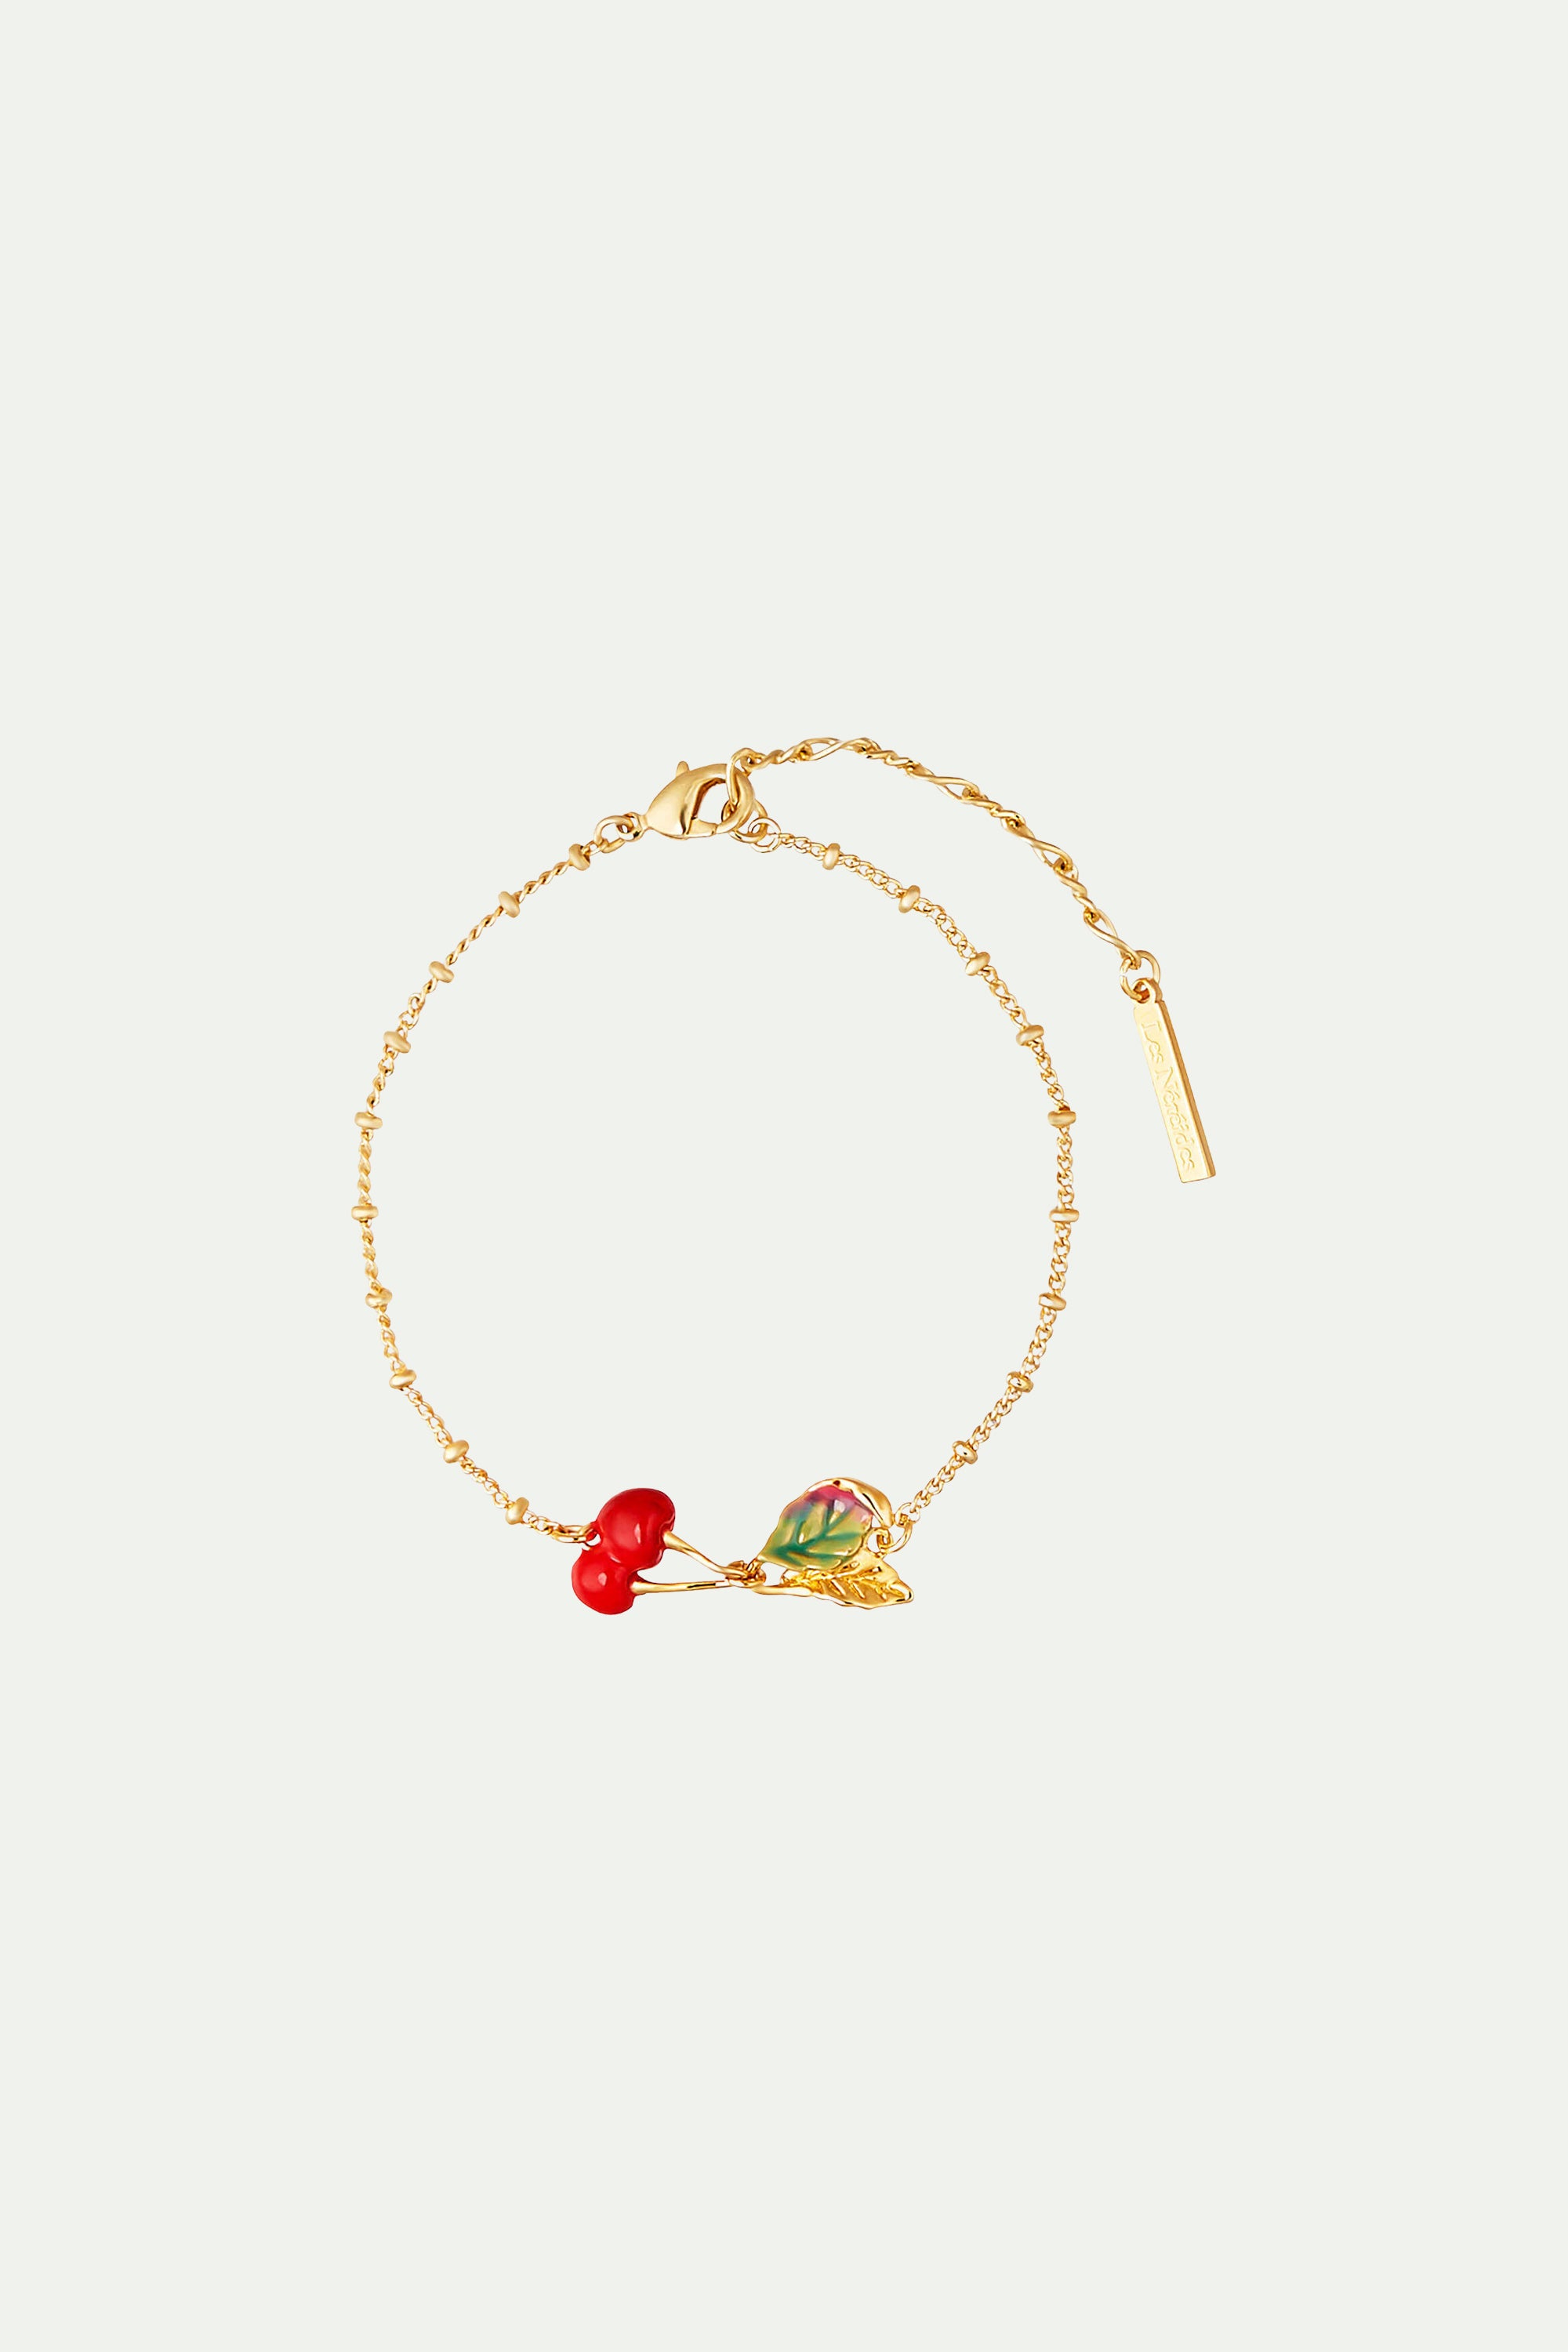 Cherries and Leave Thin Bracelet